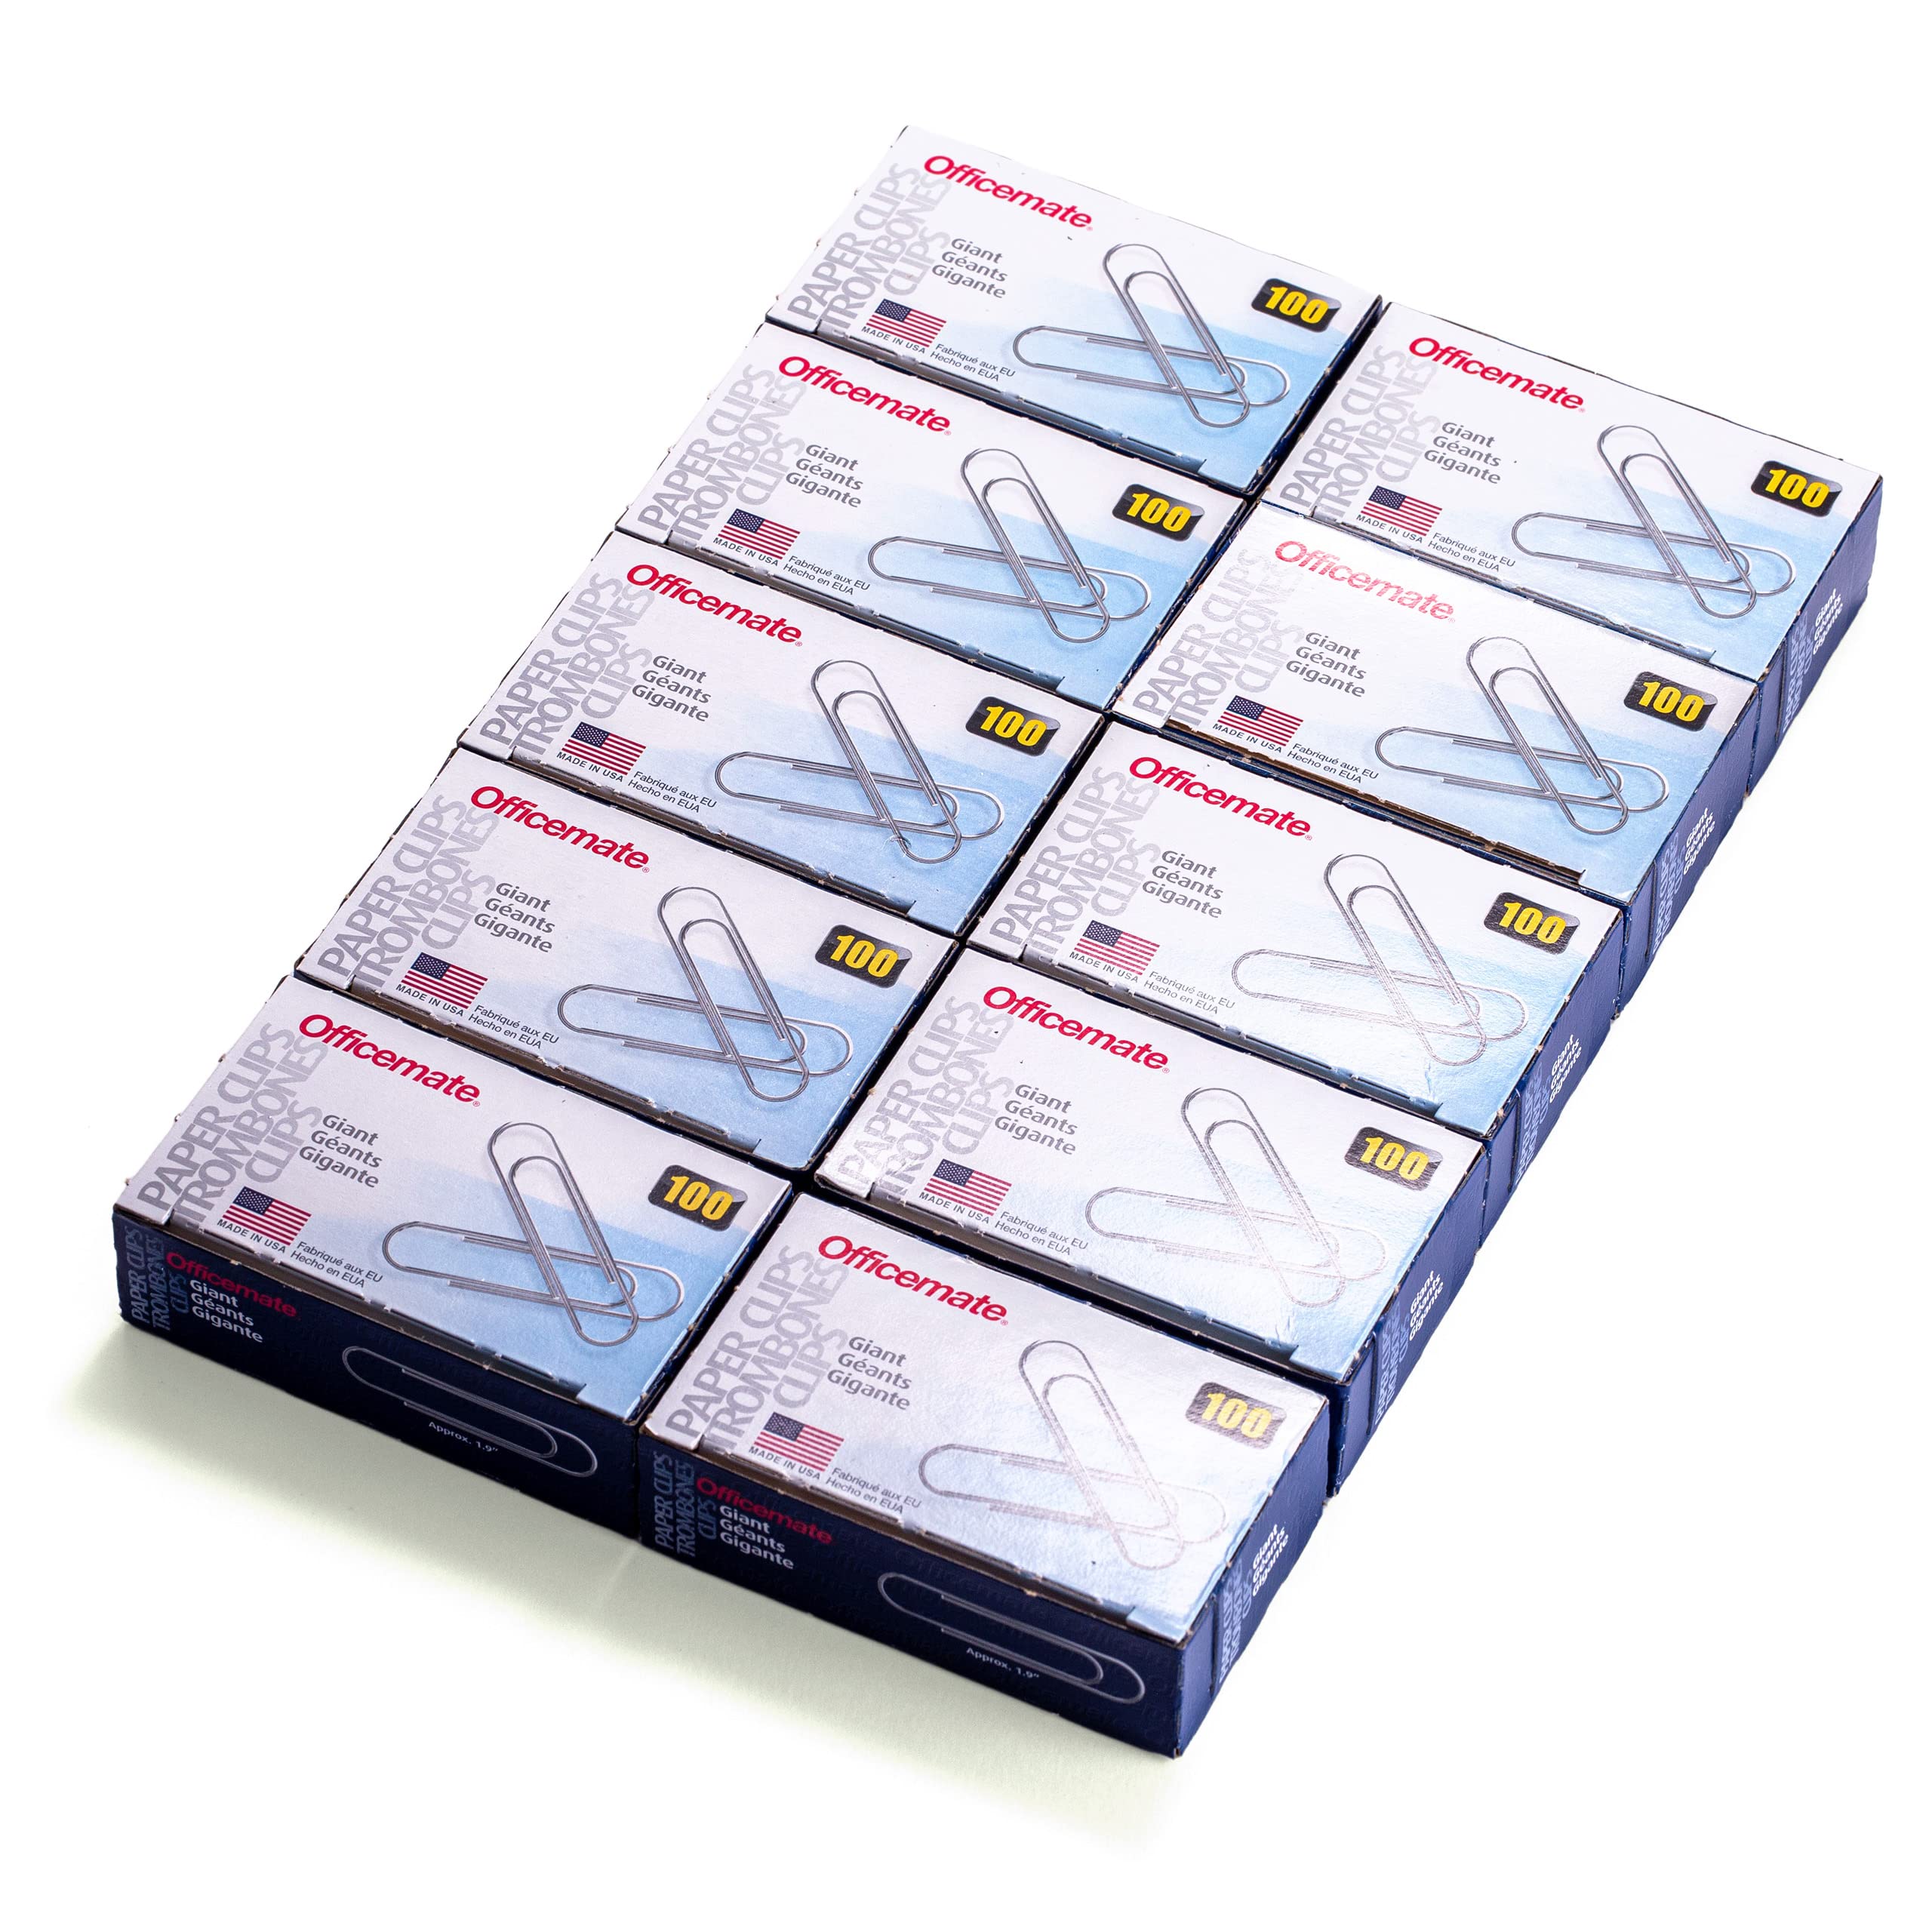 Book Cover Officemate Giant Paper Clips, Pack of 10 Boxes of 100 Clips Each (1,000 Clips Total) (99914)